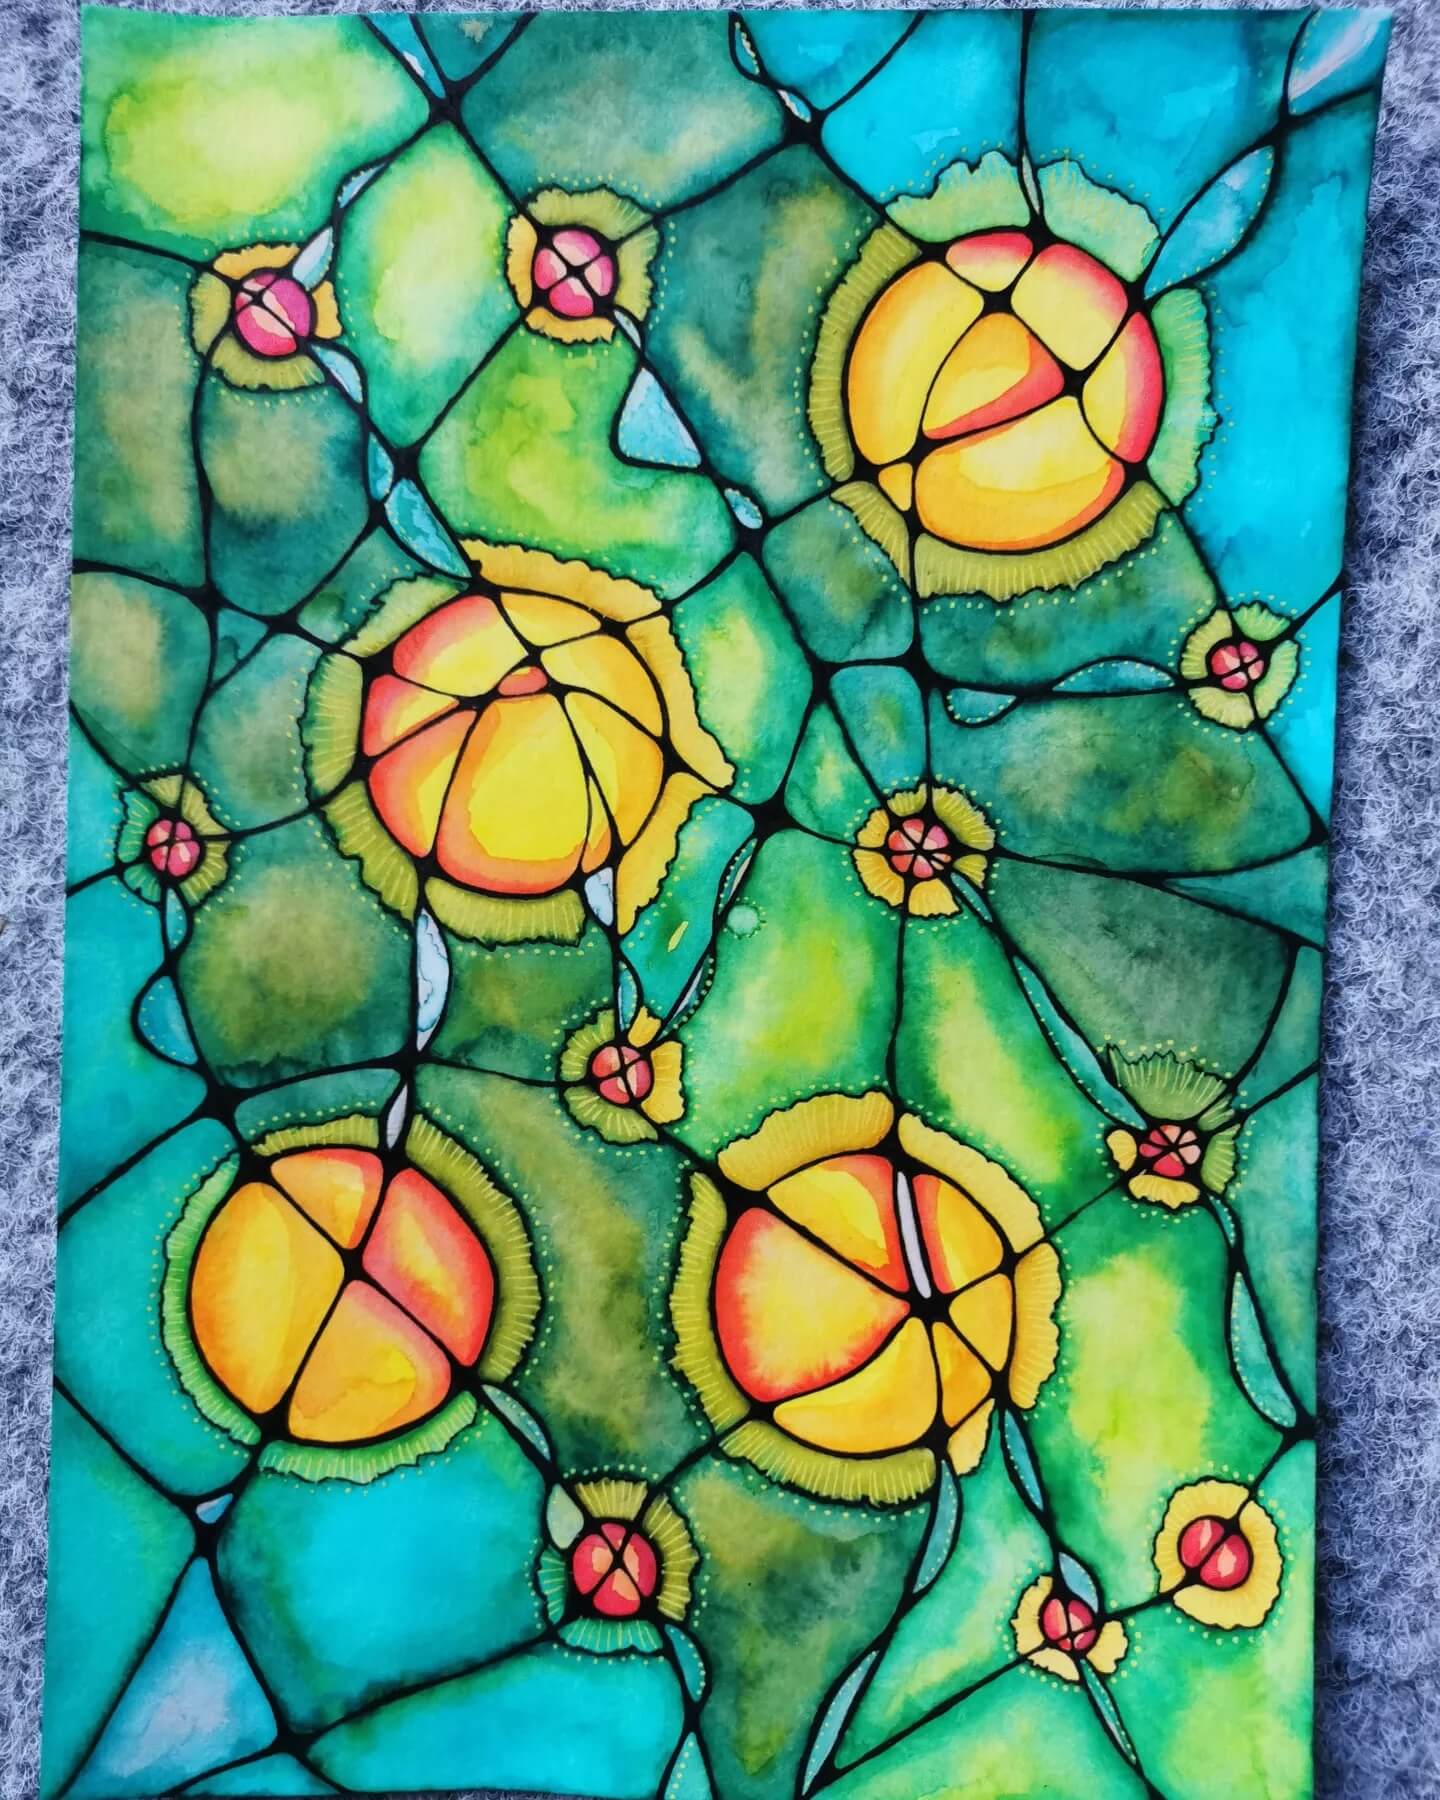 A stained glass image with yellow flowers.